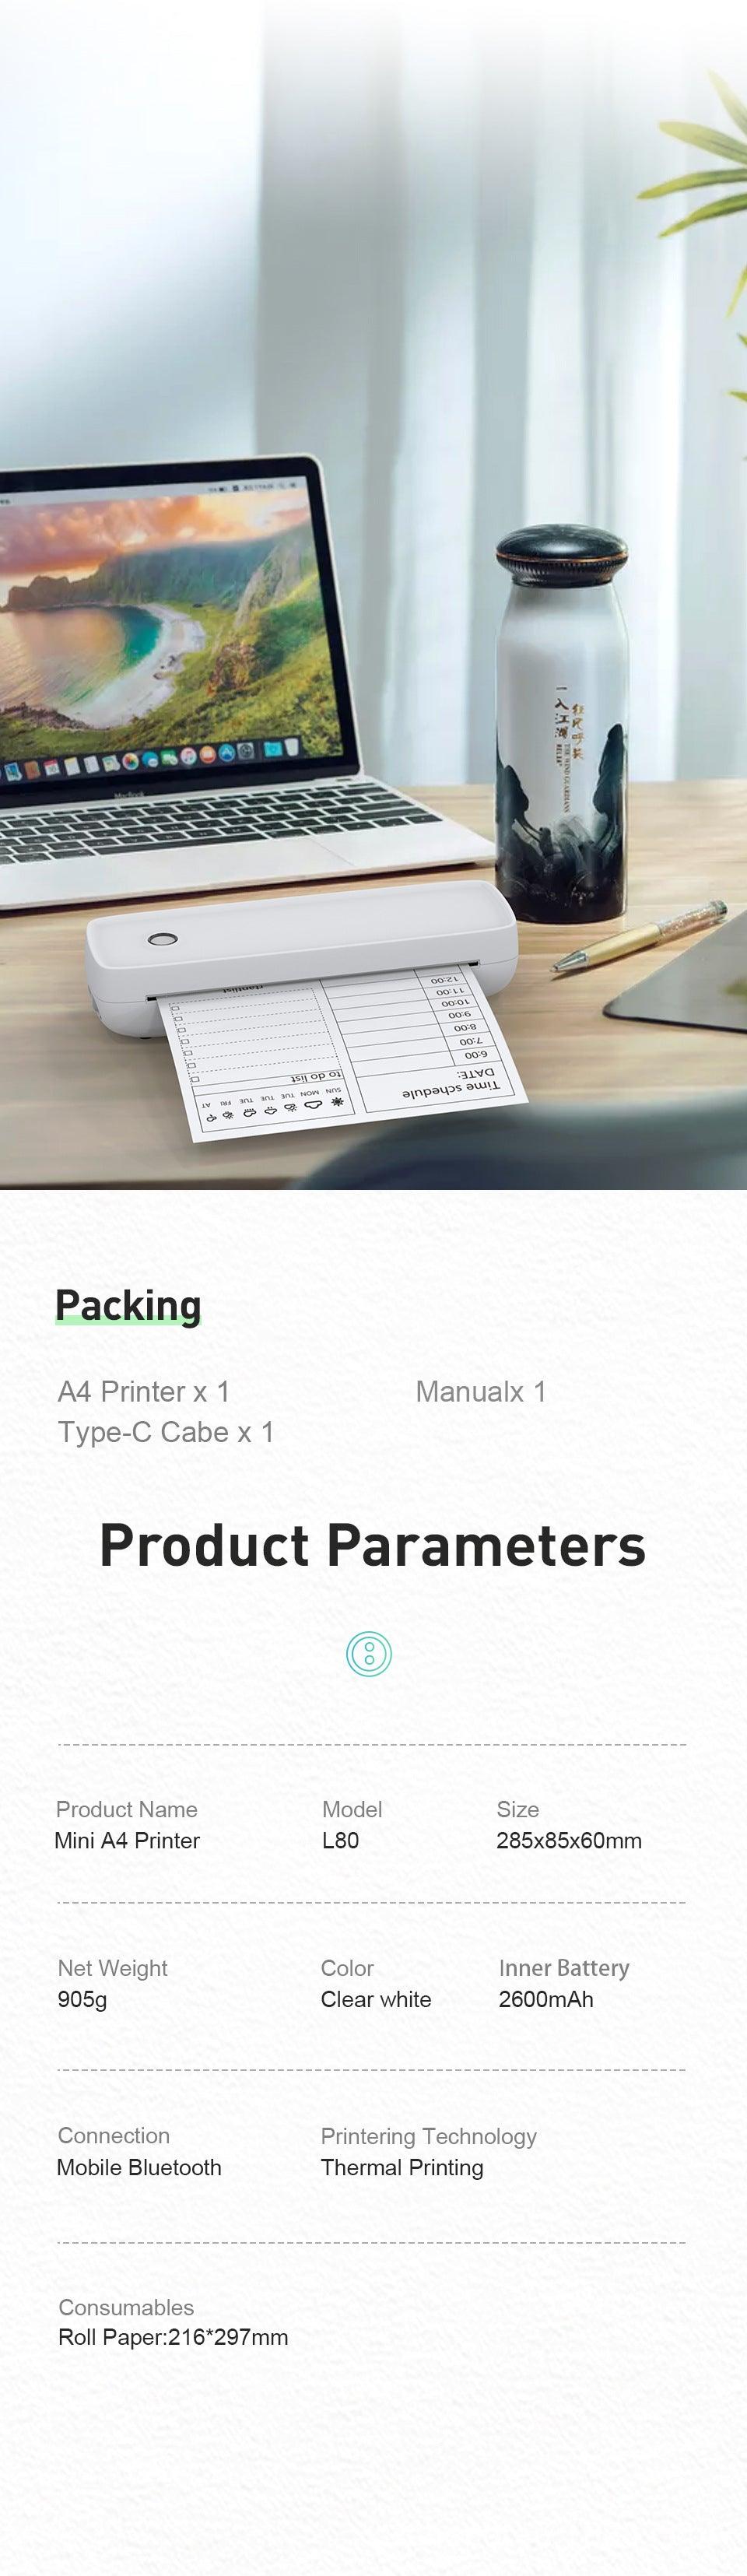 Portable Printer Wireless Bluetooth - Inkless Thermal Printer Supporting A4 Paper - Home Living Mall